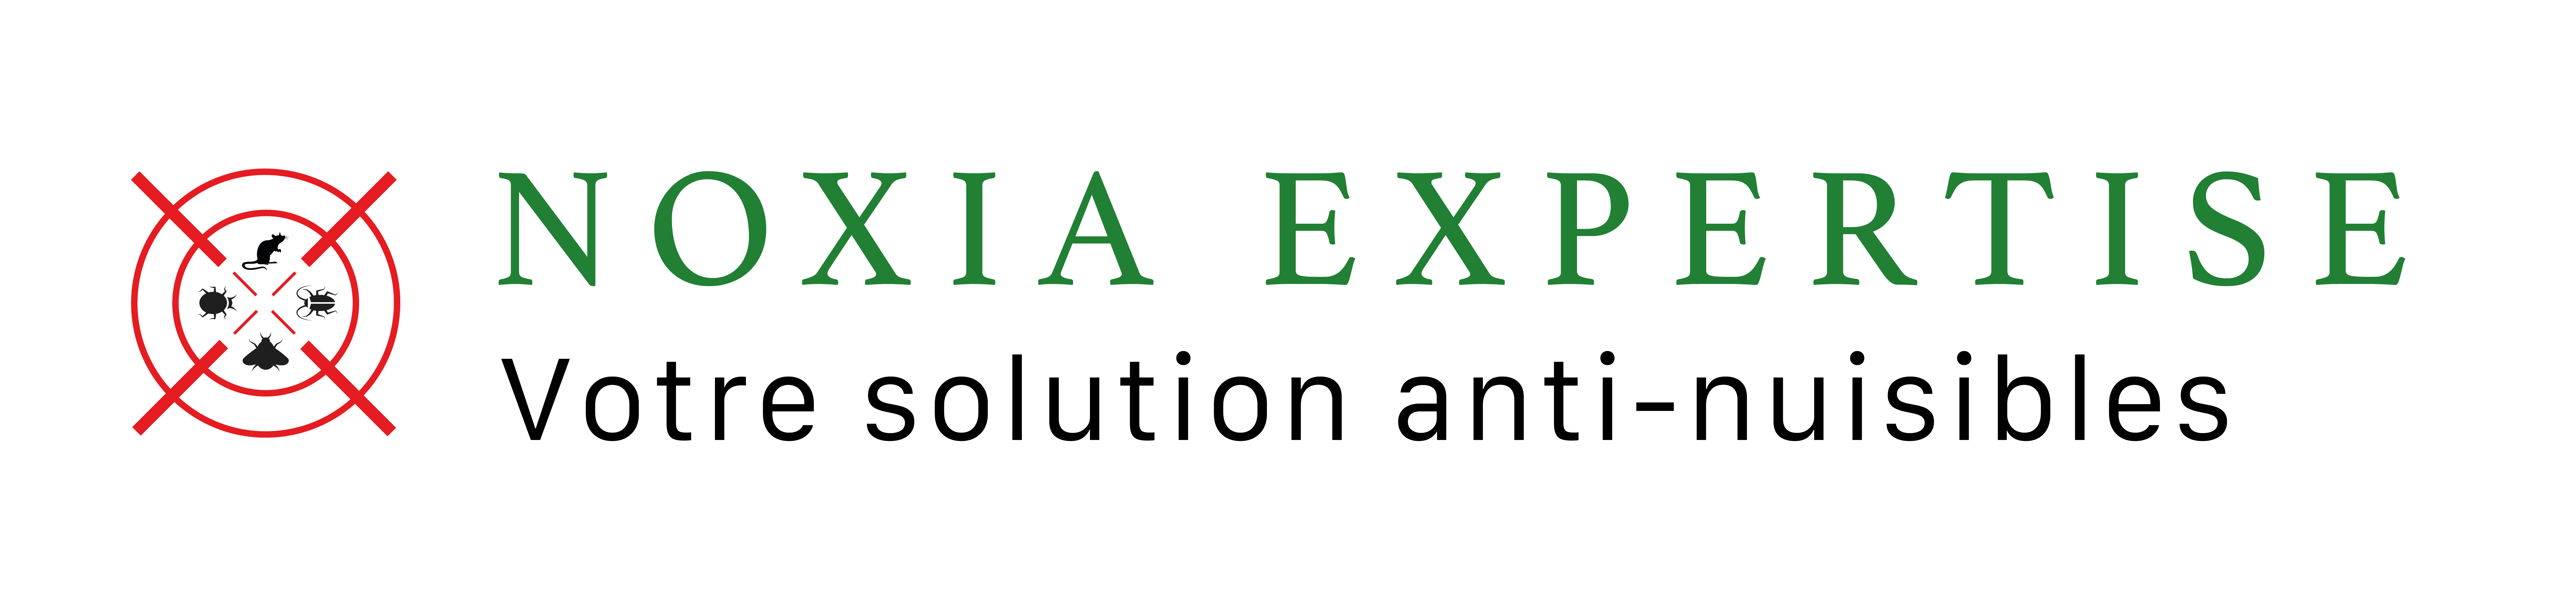 Noxia Expertise